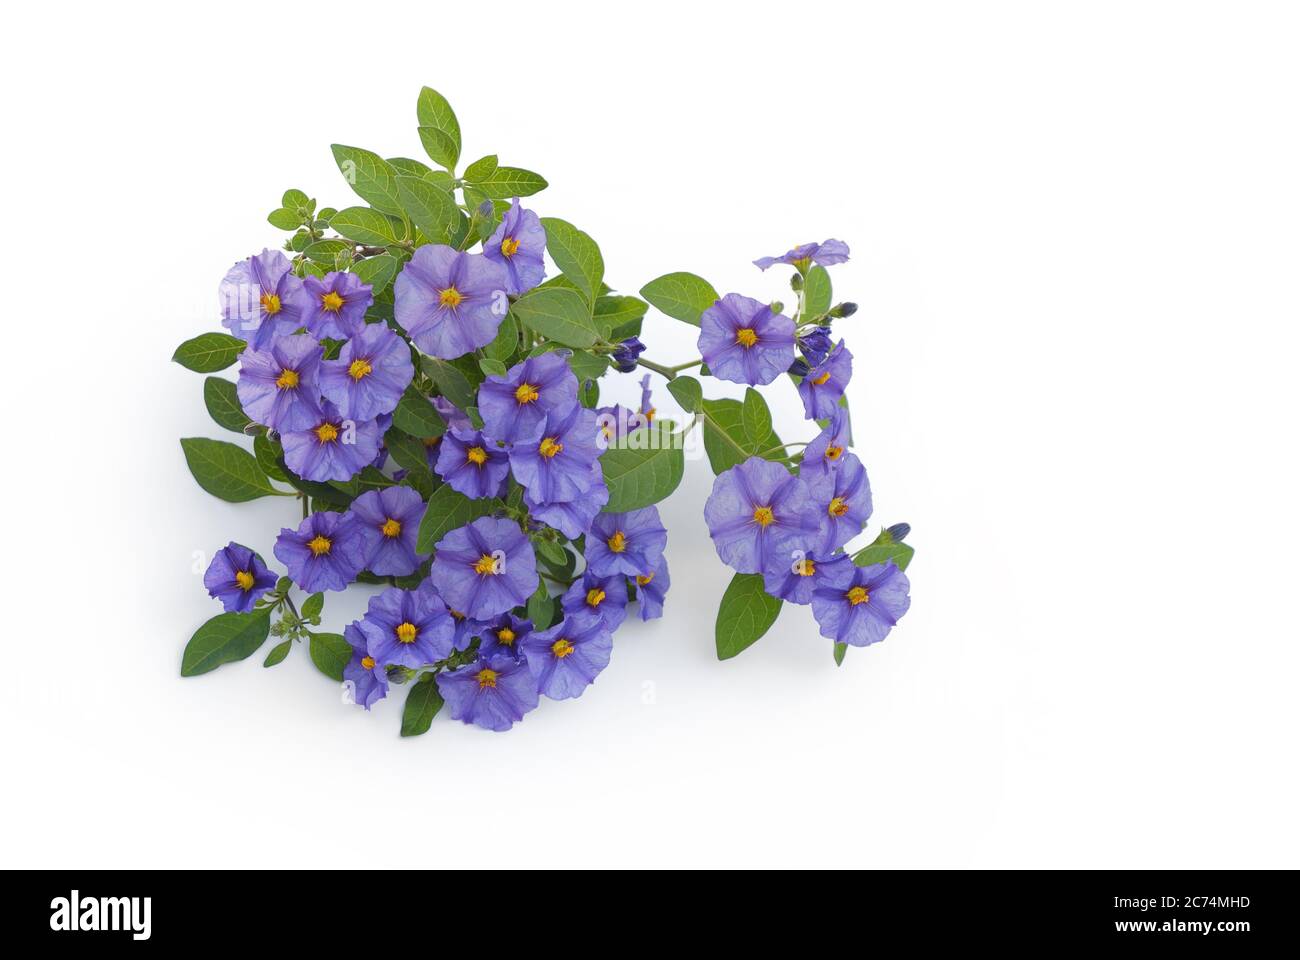 blue violet gentian shrub lies on a white background Stock Photo